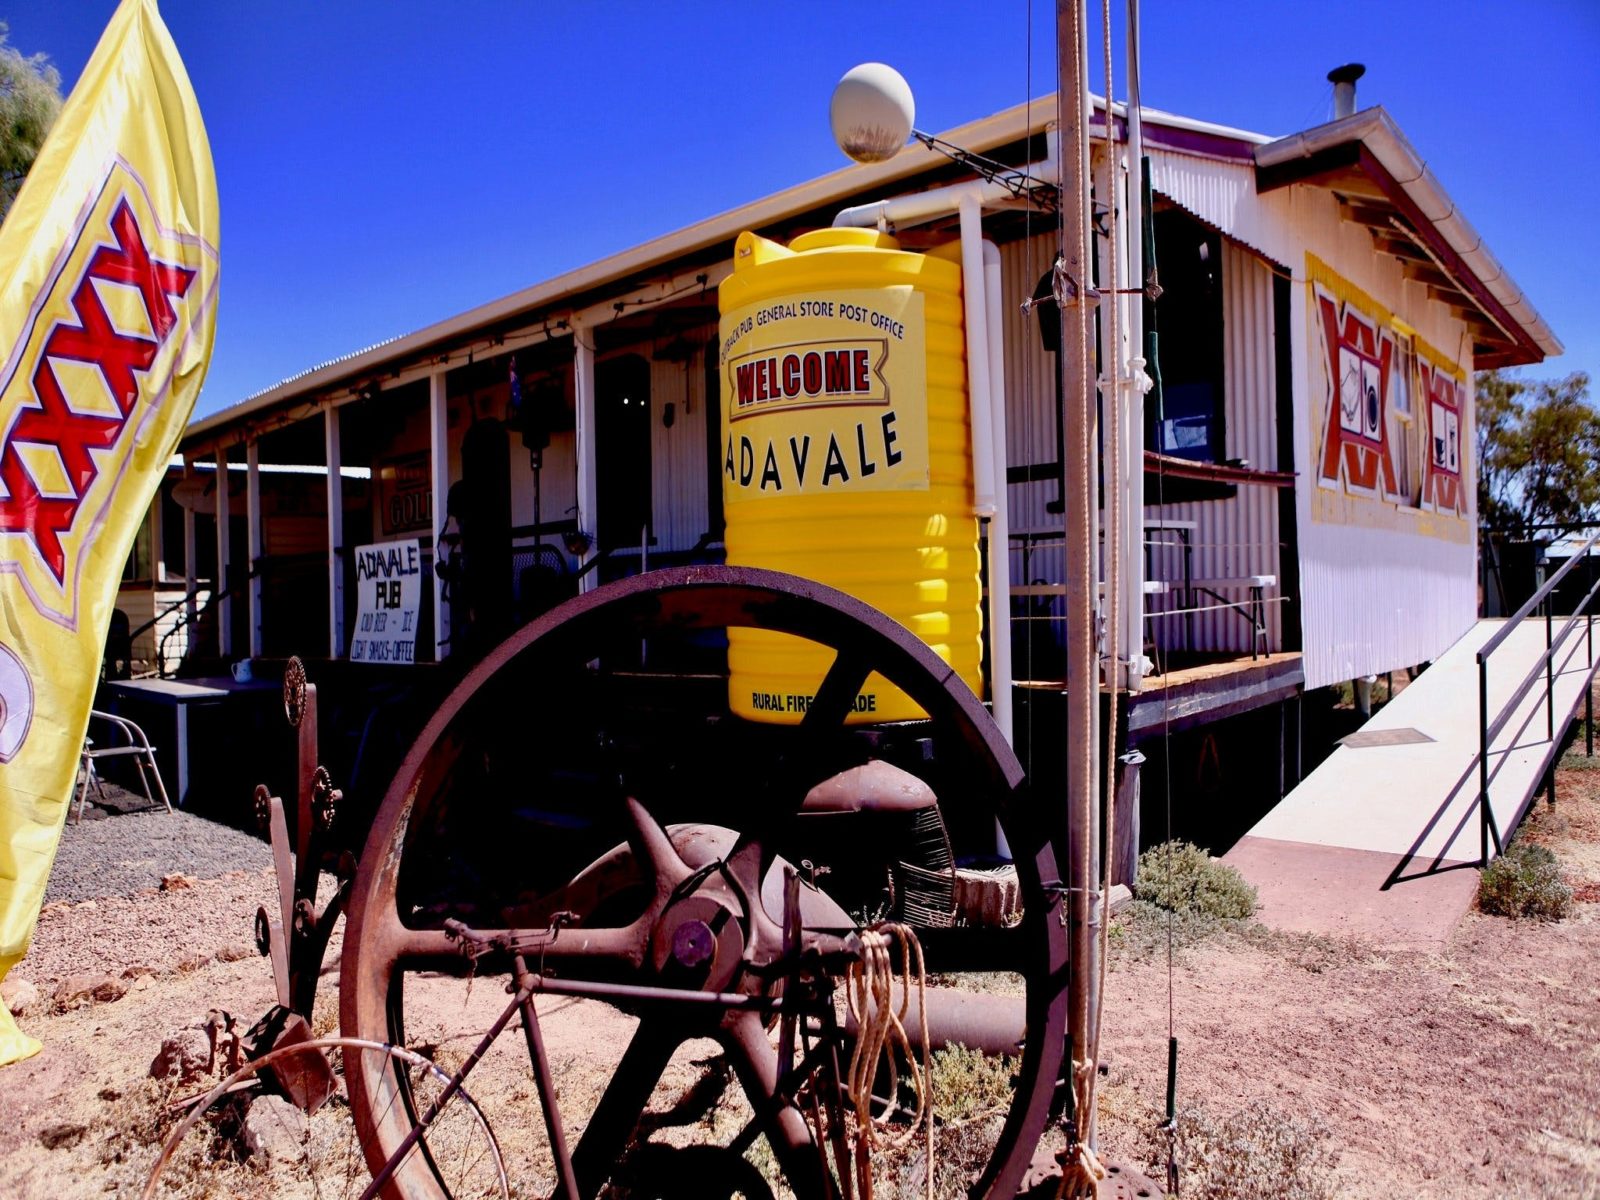 Adavale Pub and General Store